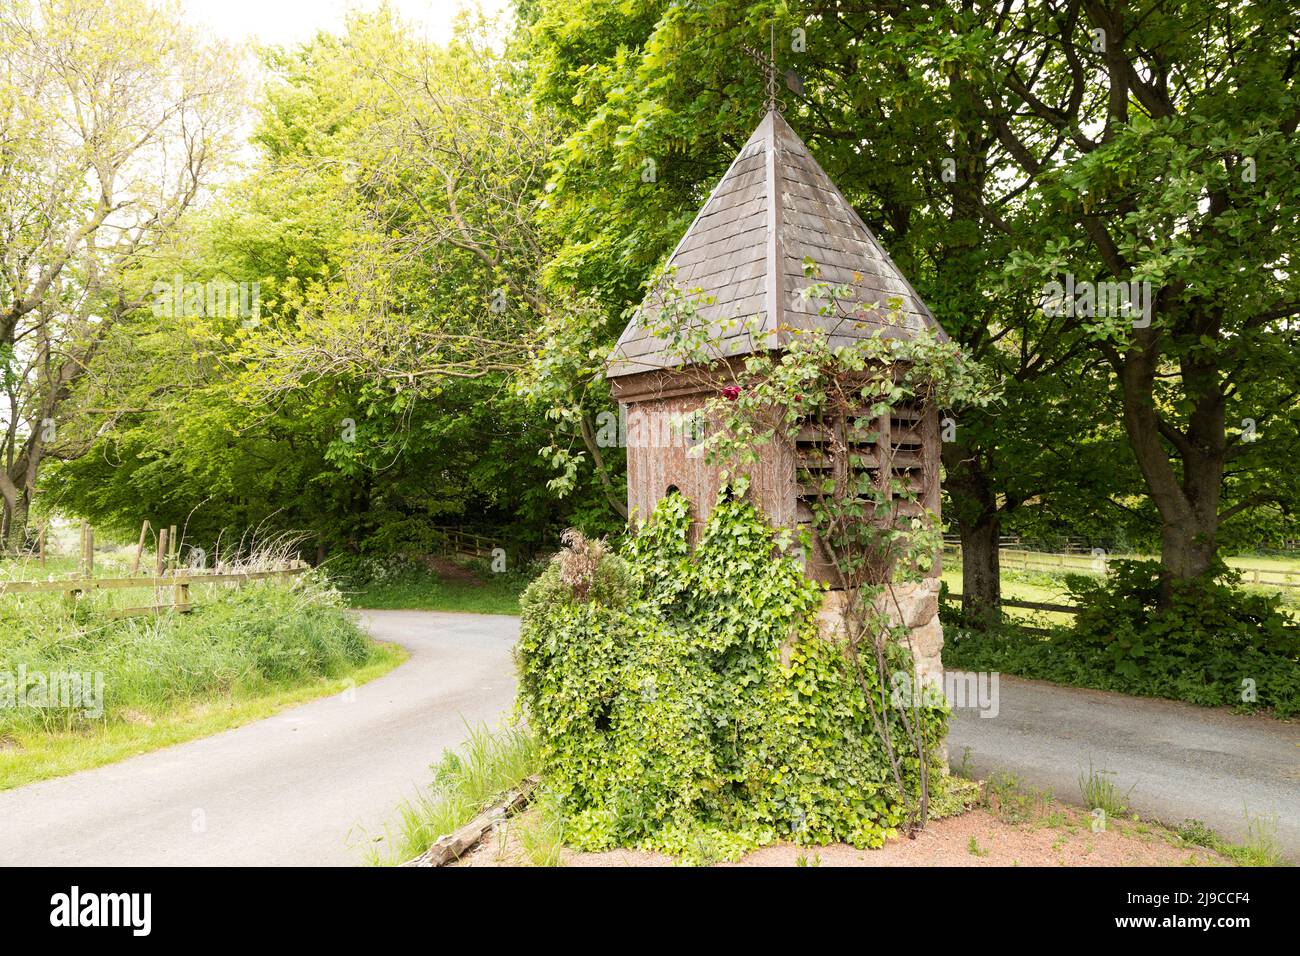 Dovecote at Old Burdon Village in Sunderland, England. The freestanding structure was designed to house pigeons or doves. Stock Photo